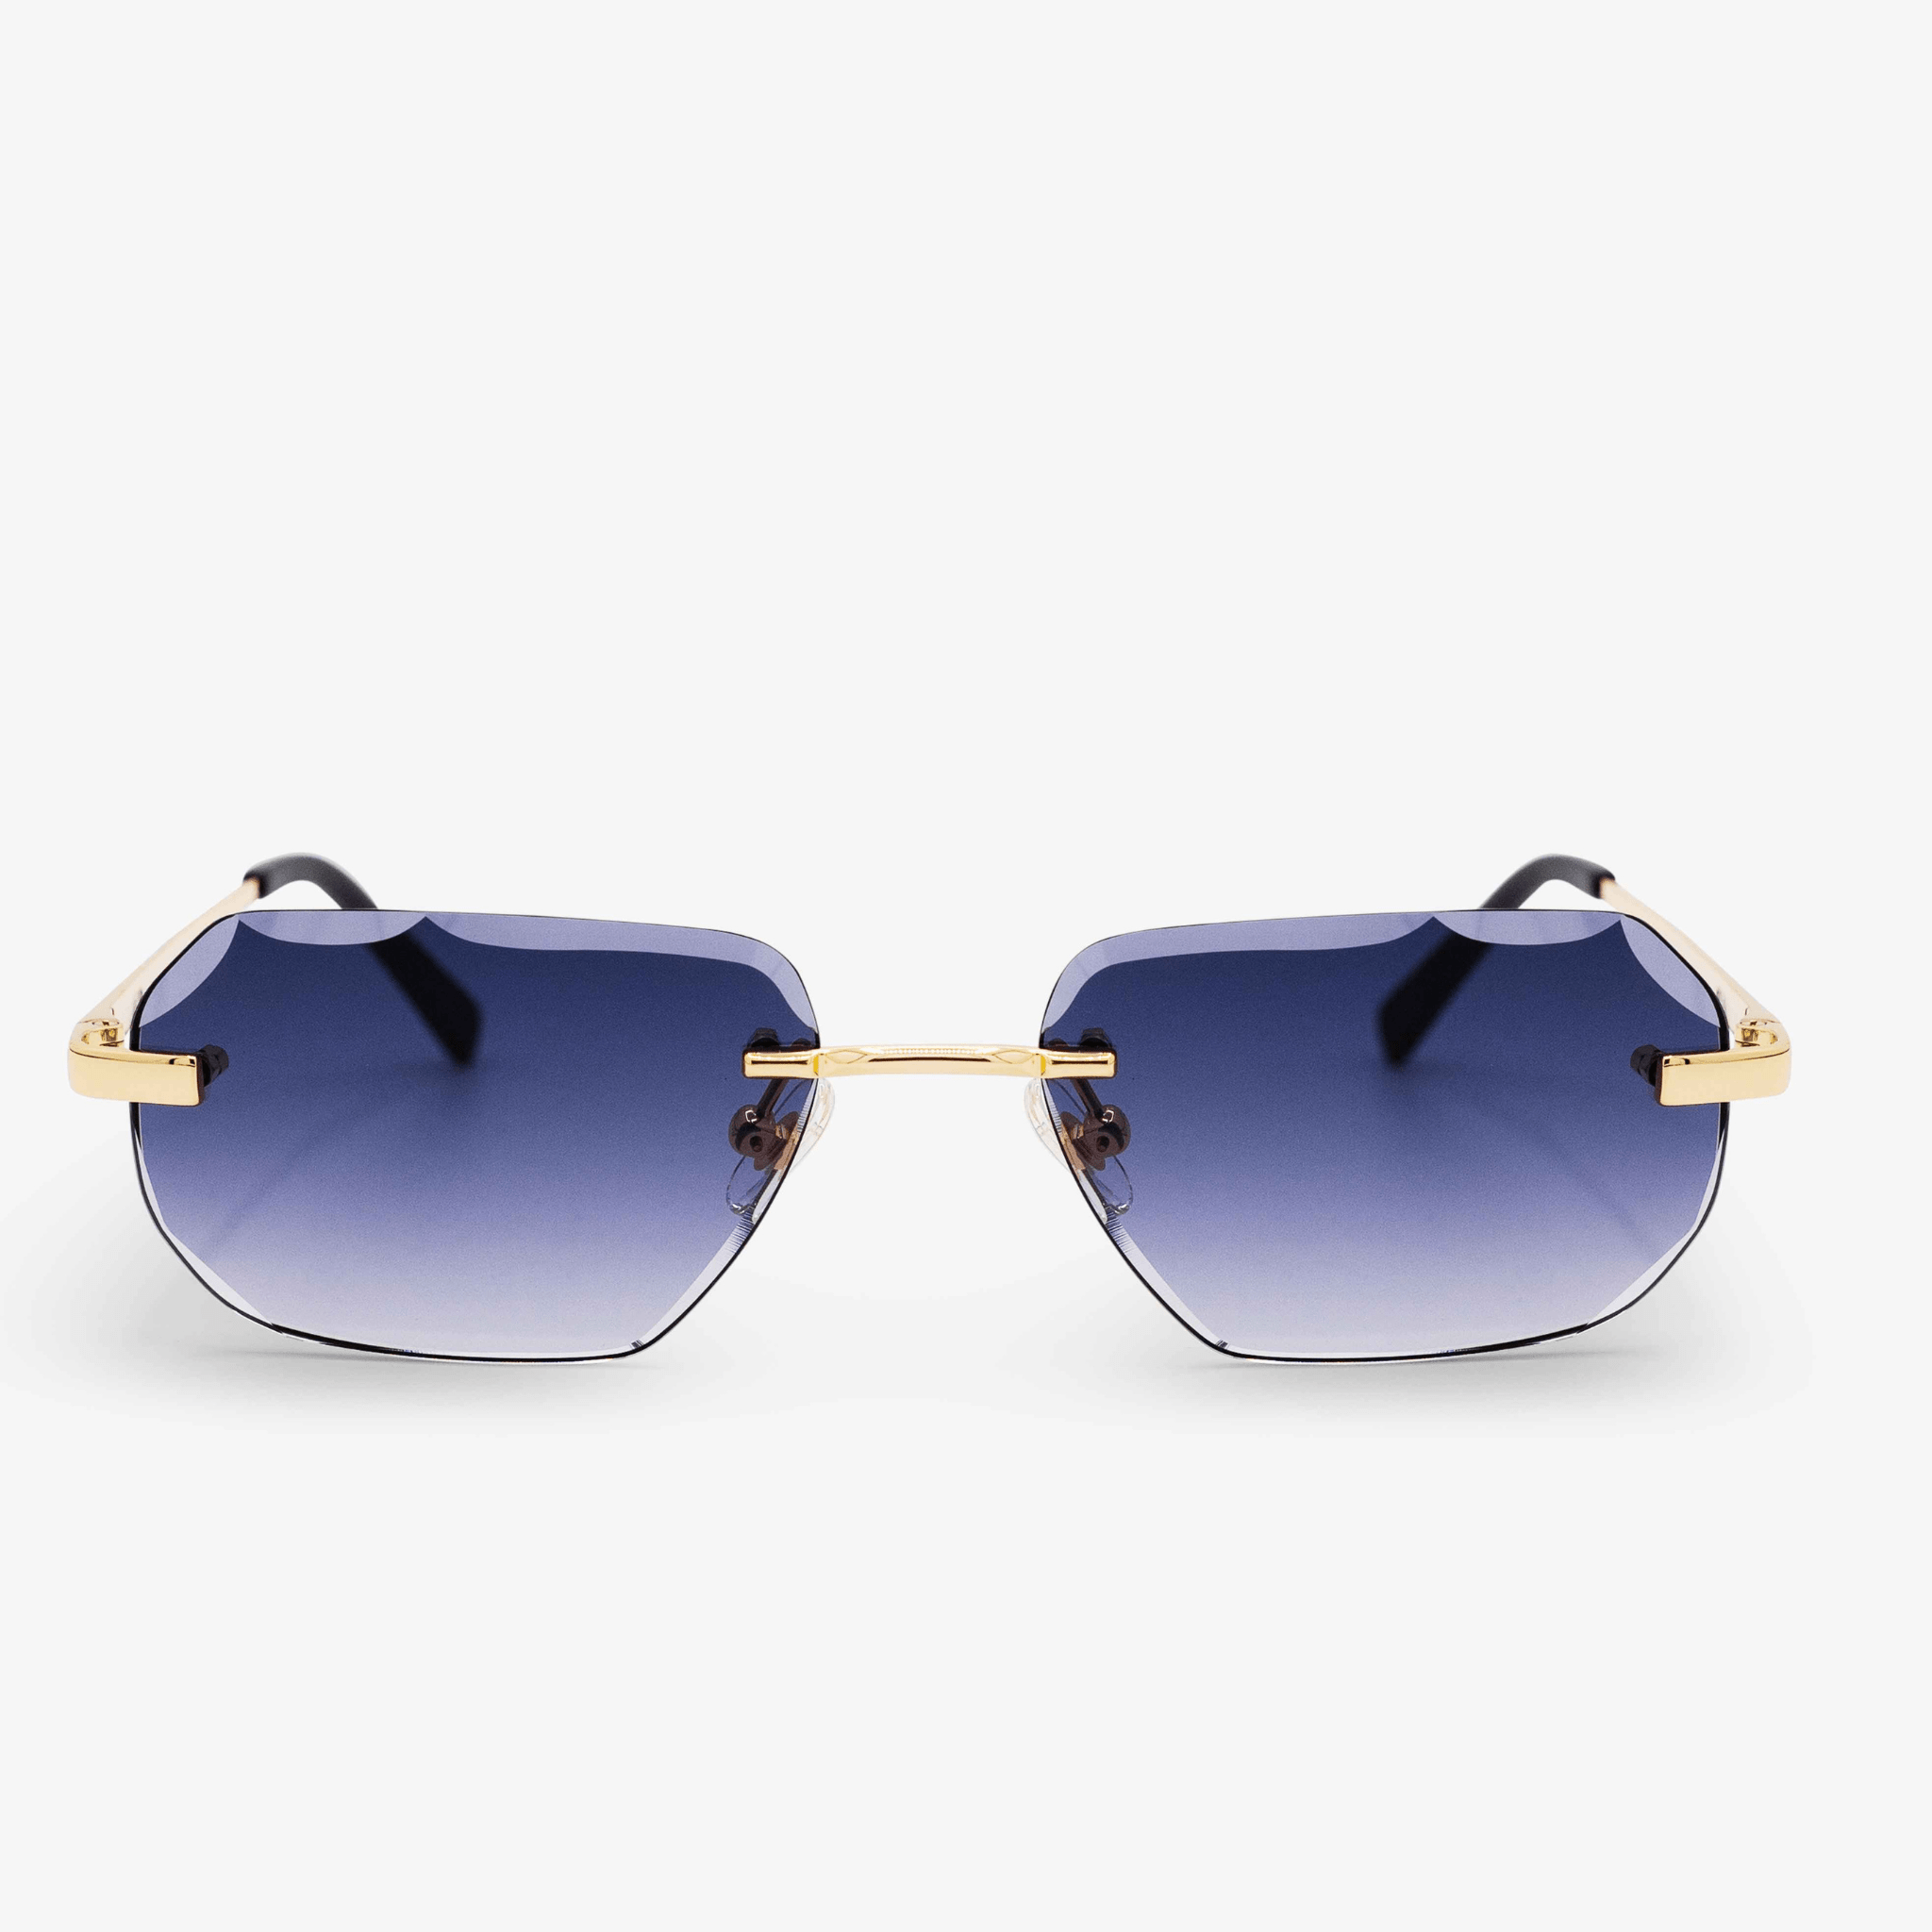 Model Jubilee diamond-cut, grey rimless sunglasses with 18K gold-plated detailing on the arms and bridge, against a white background.